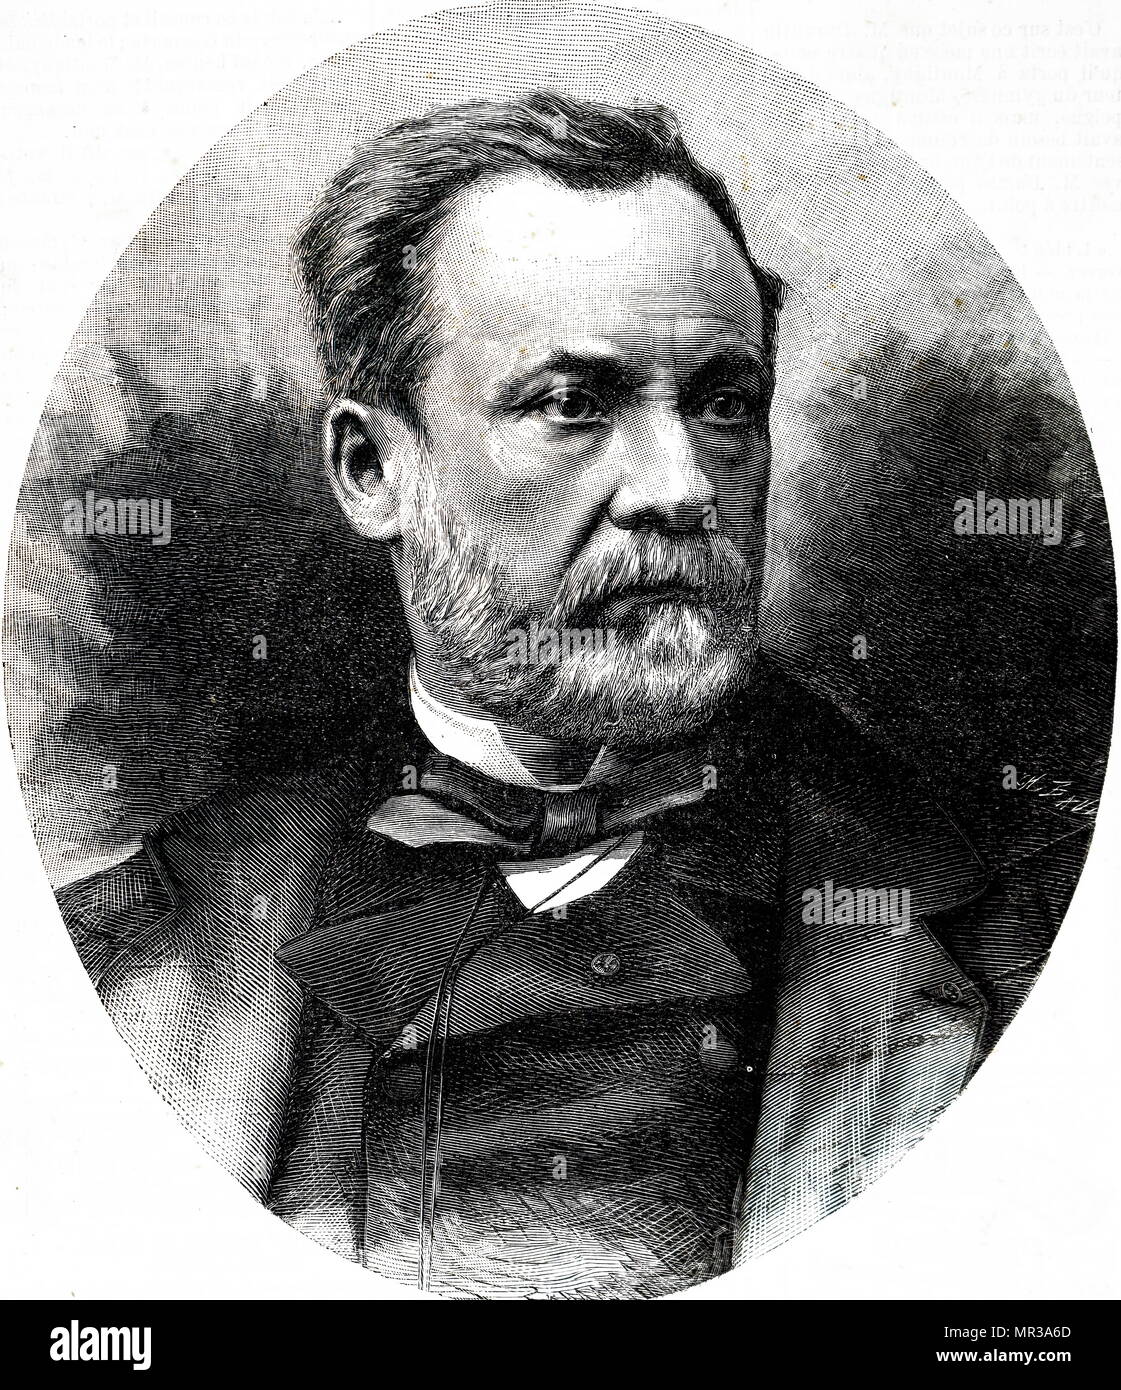 Portrait of Louis Pasteur (1822-1895) a French biologist, microbiologist and chemist renowned for his discoveries of the principles of vaccination, microbial fermentation and pasteurisation. Dated 19th century Stock Photo